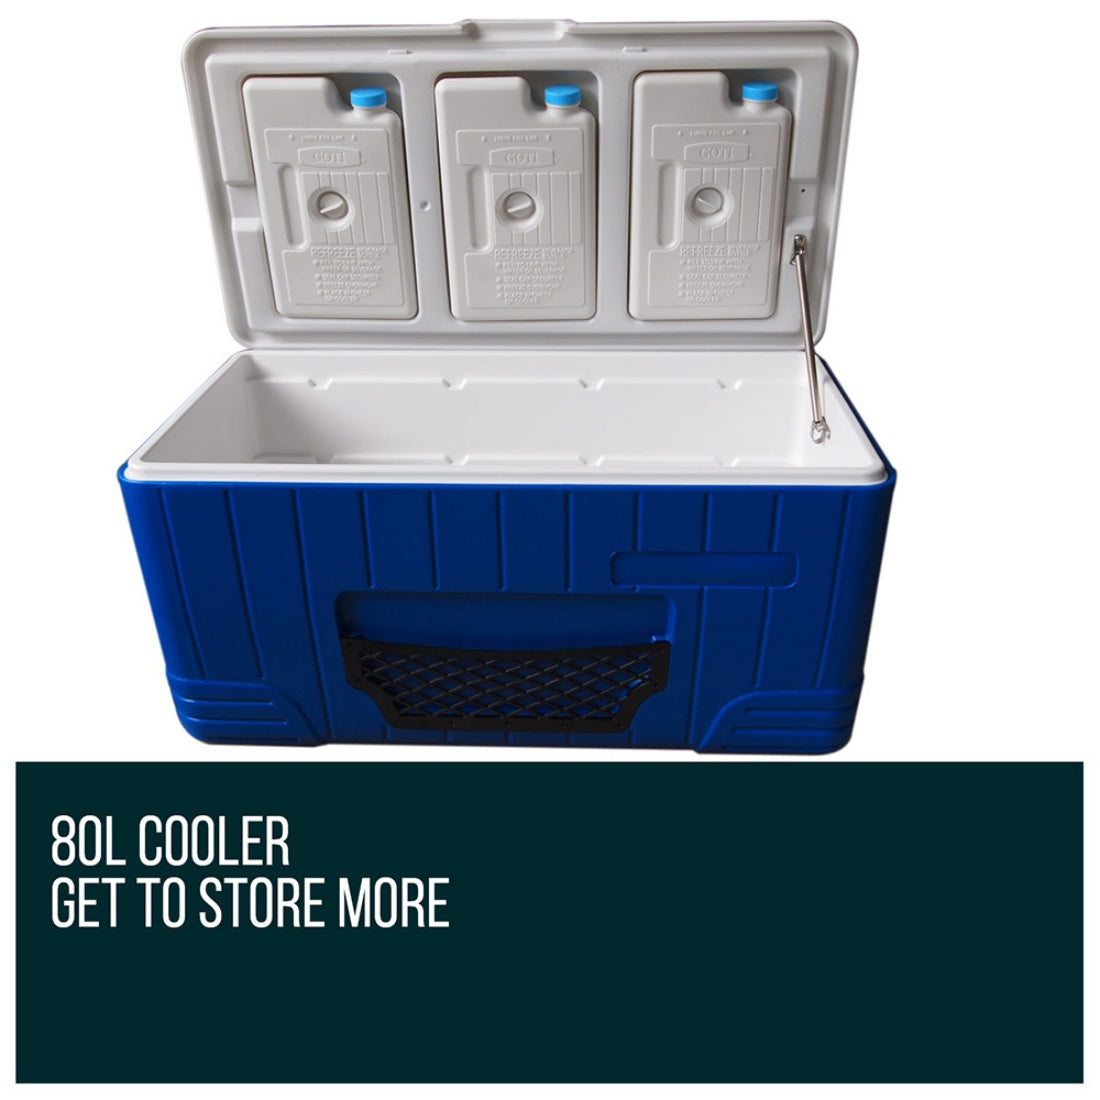 80L Litre Cooler Insulated Ice Box Cold Esky Beach Party Camping Fishing Picnic